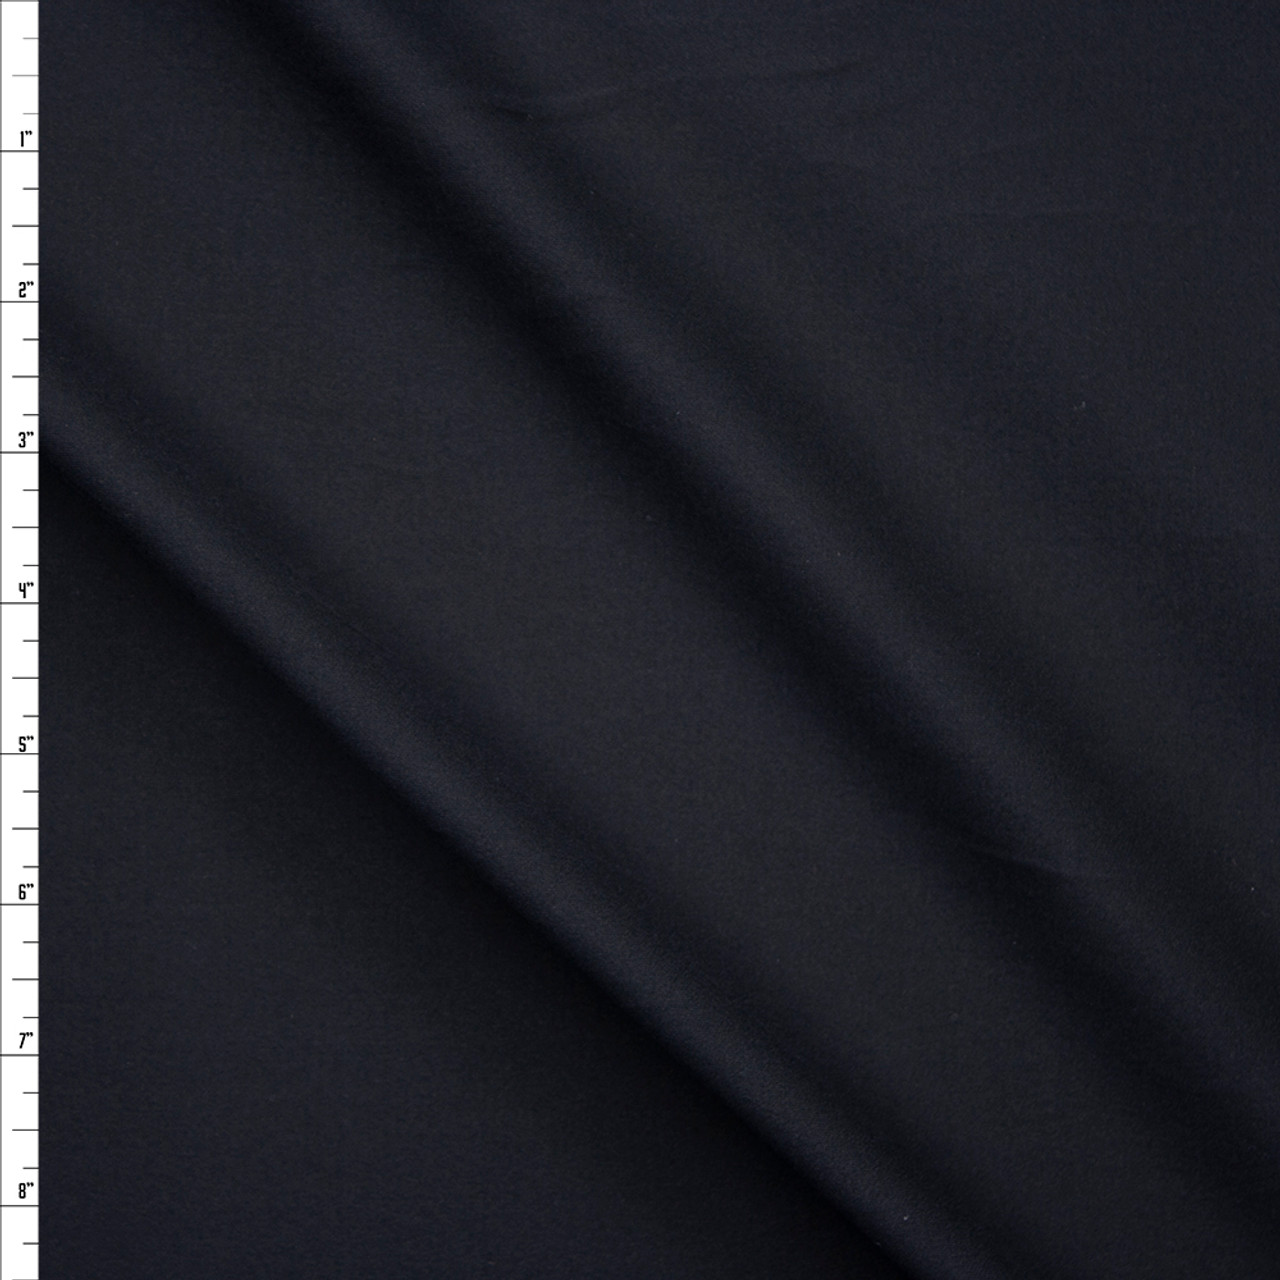 Cali Fabrics Black Brushed Midweight Athletic Knit Fabric by the Yard